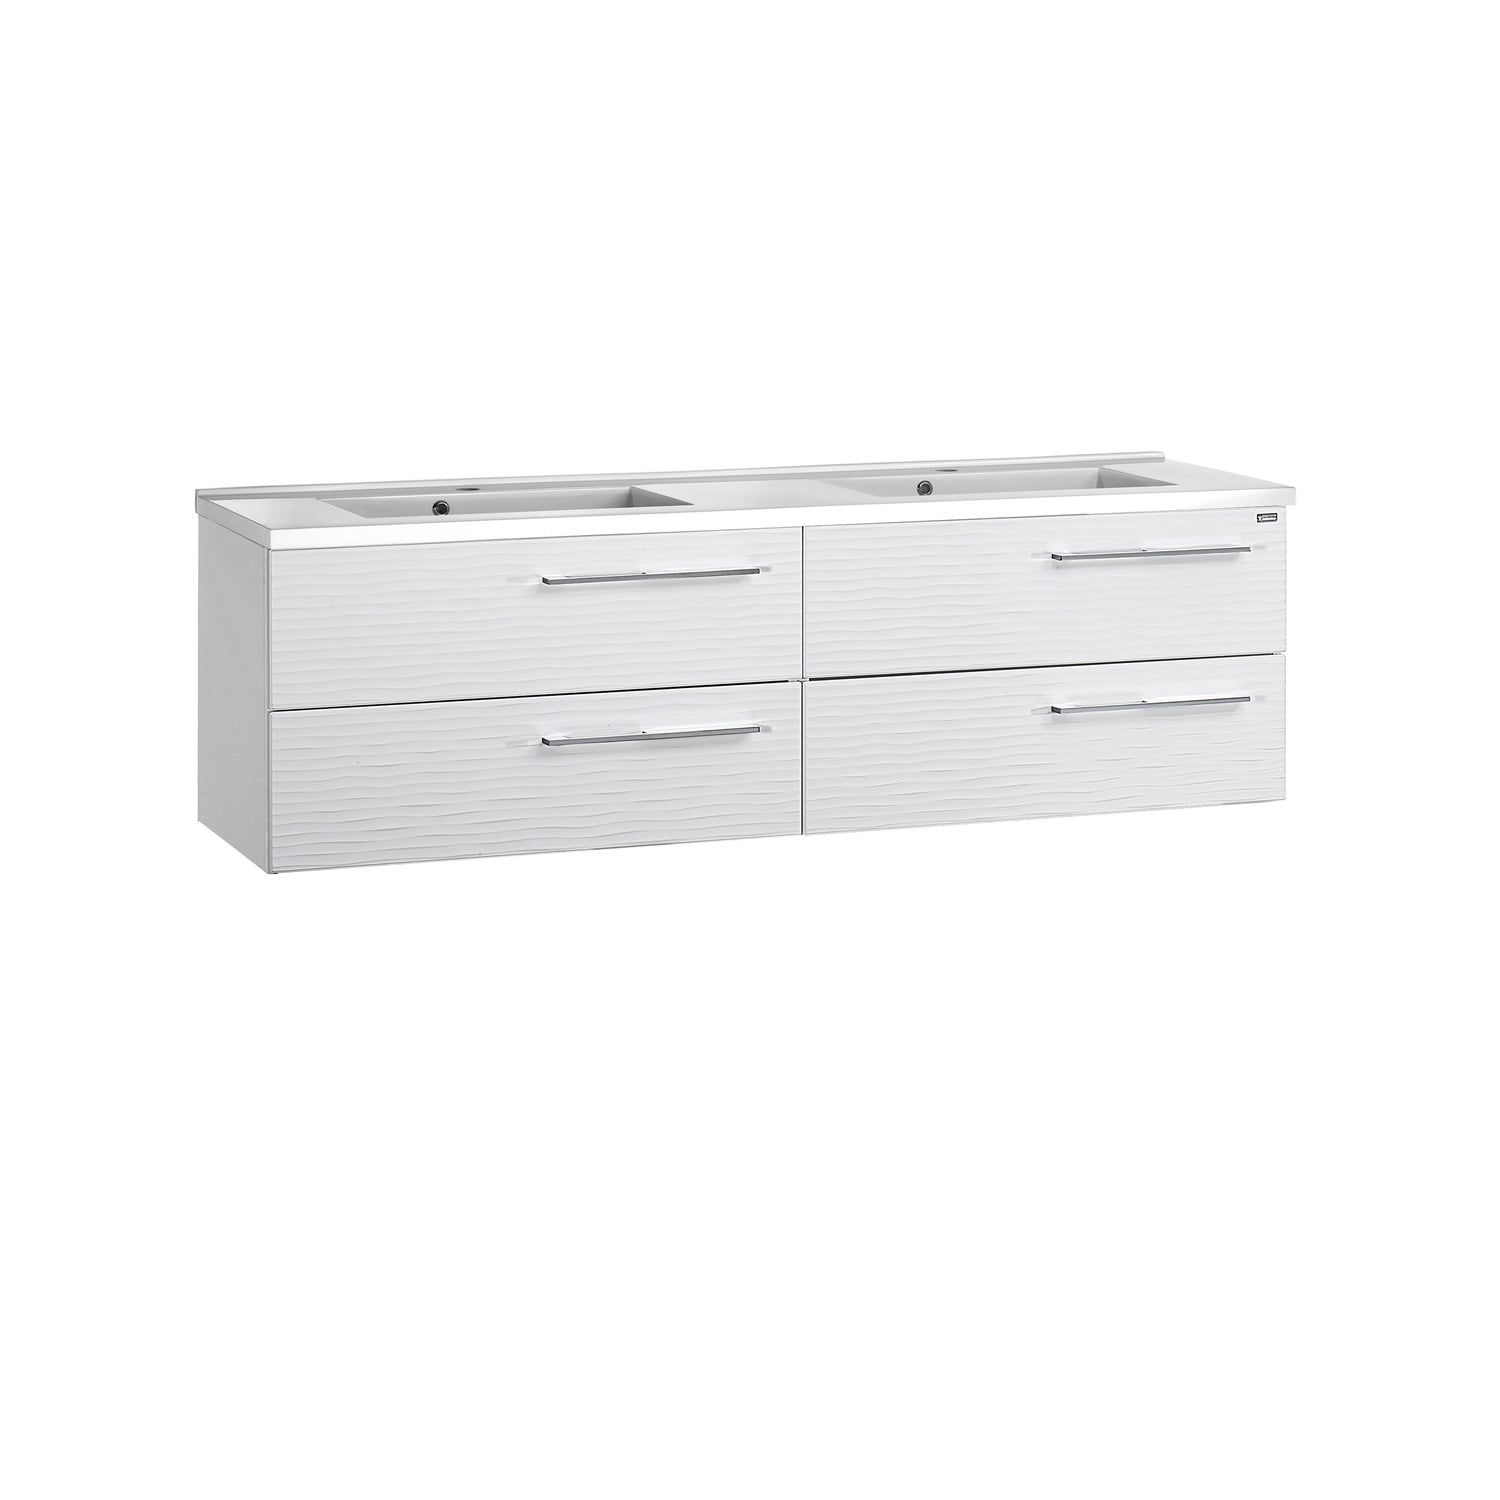 56" Double Vanity, Wall Mount, 4 Drawers with Soft Close, Serie Dune by VALENZUELA